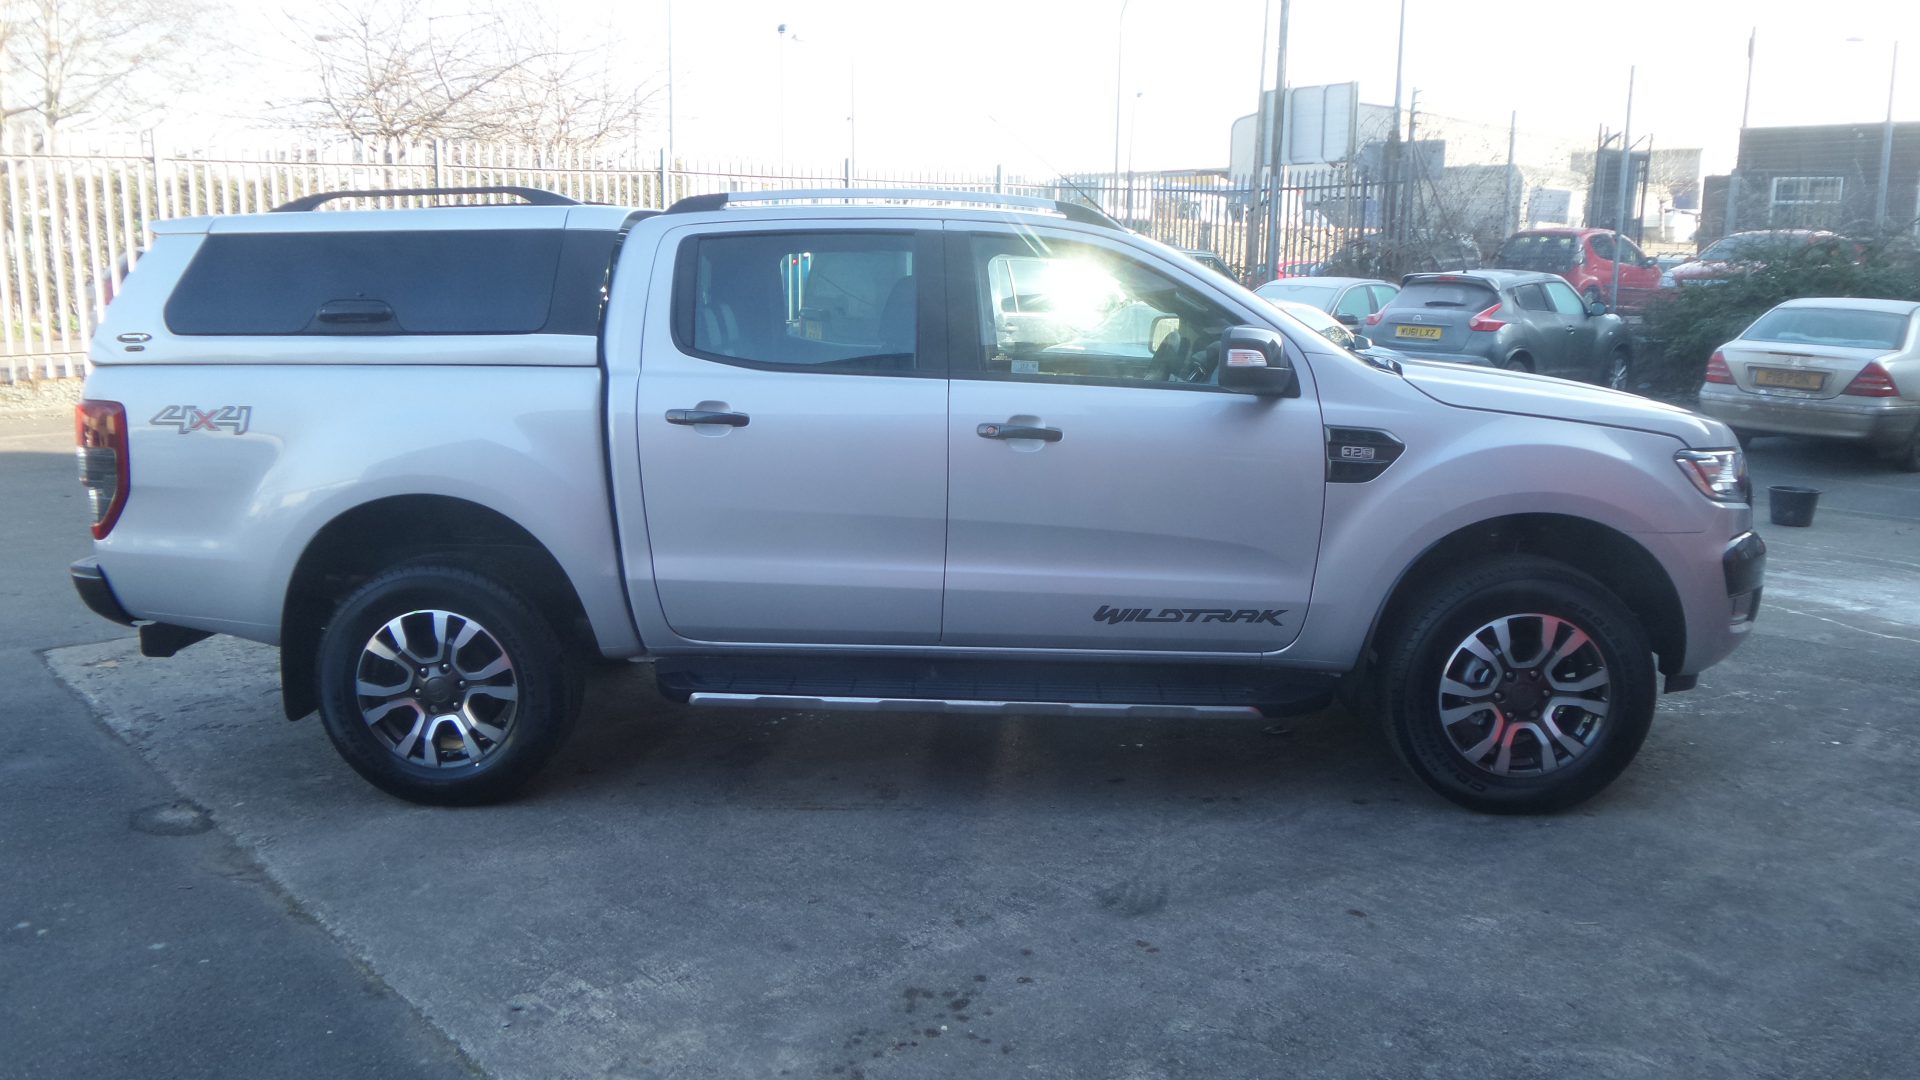 Ford Ranger Avantgarde Hardtop Incorporating The Highest Level Security Package Plus 3 Door Alarm And Central Locking